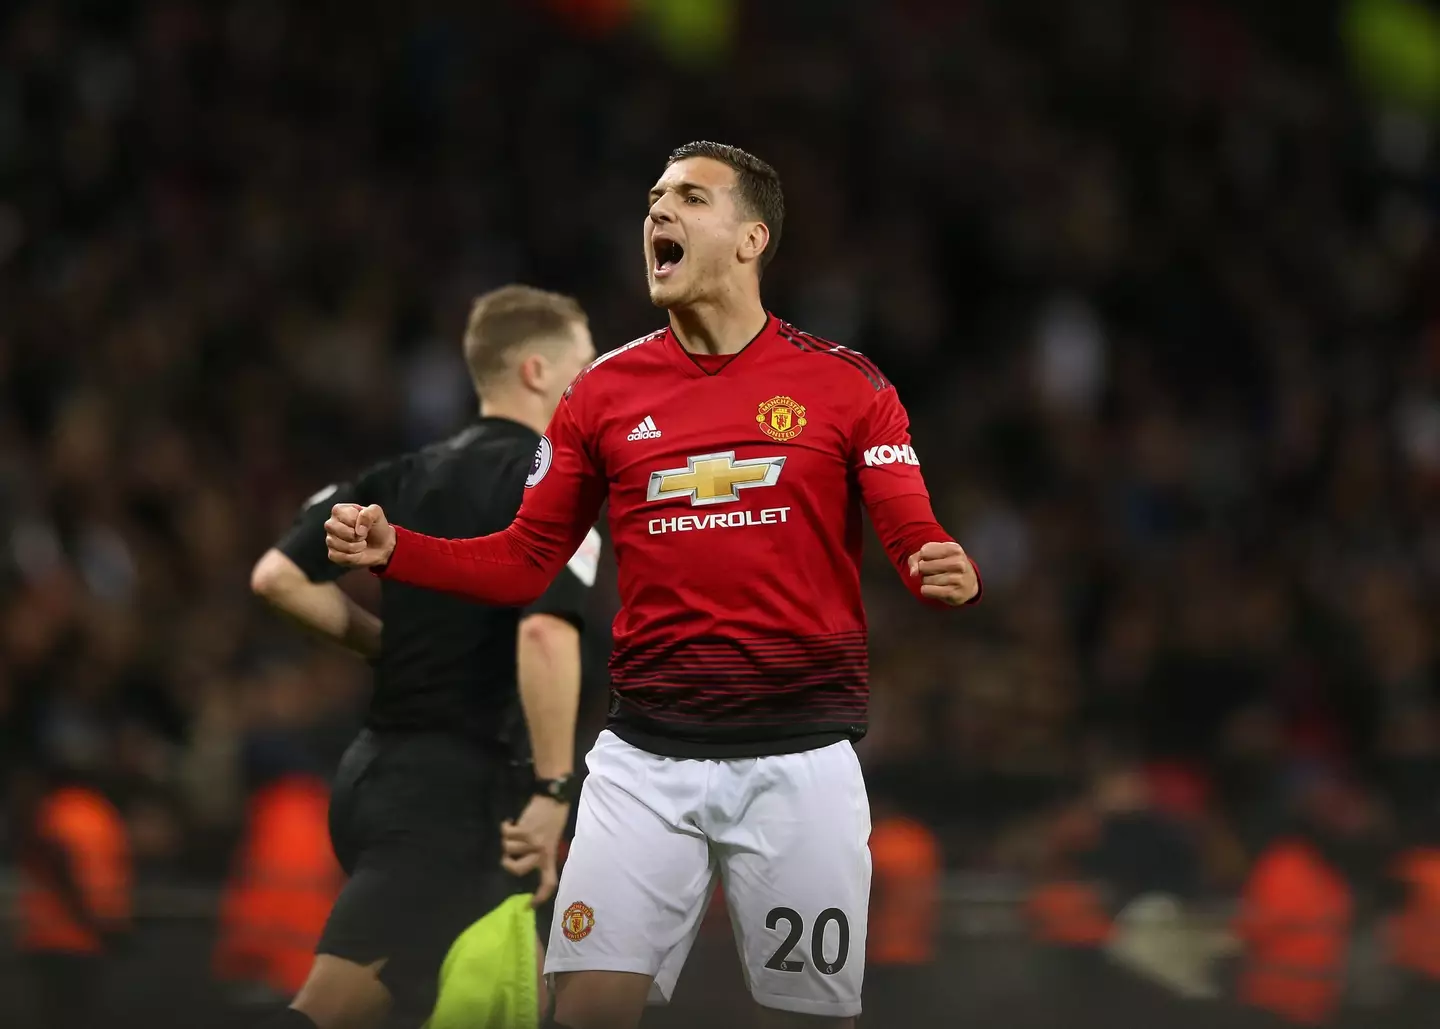 Diogo Dalot celebrates after helping Manchester United defeat Tottenham 1-0 at Wembley Stadium in January 2019 |